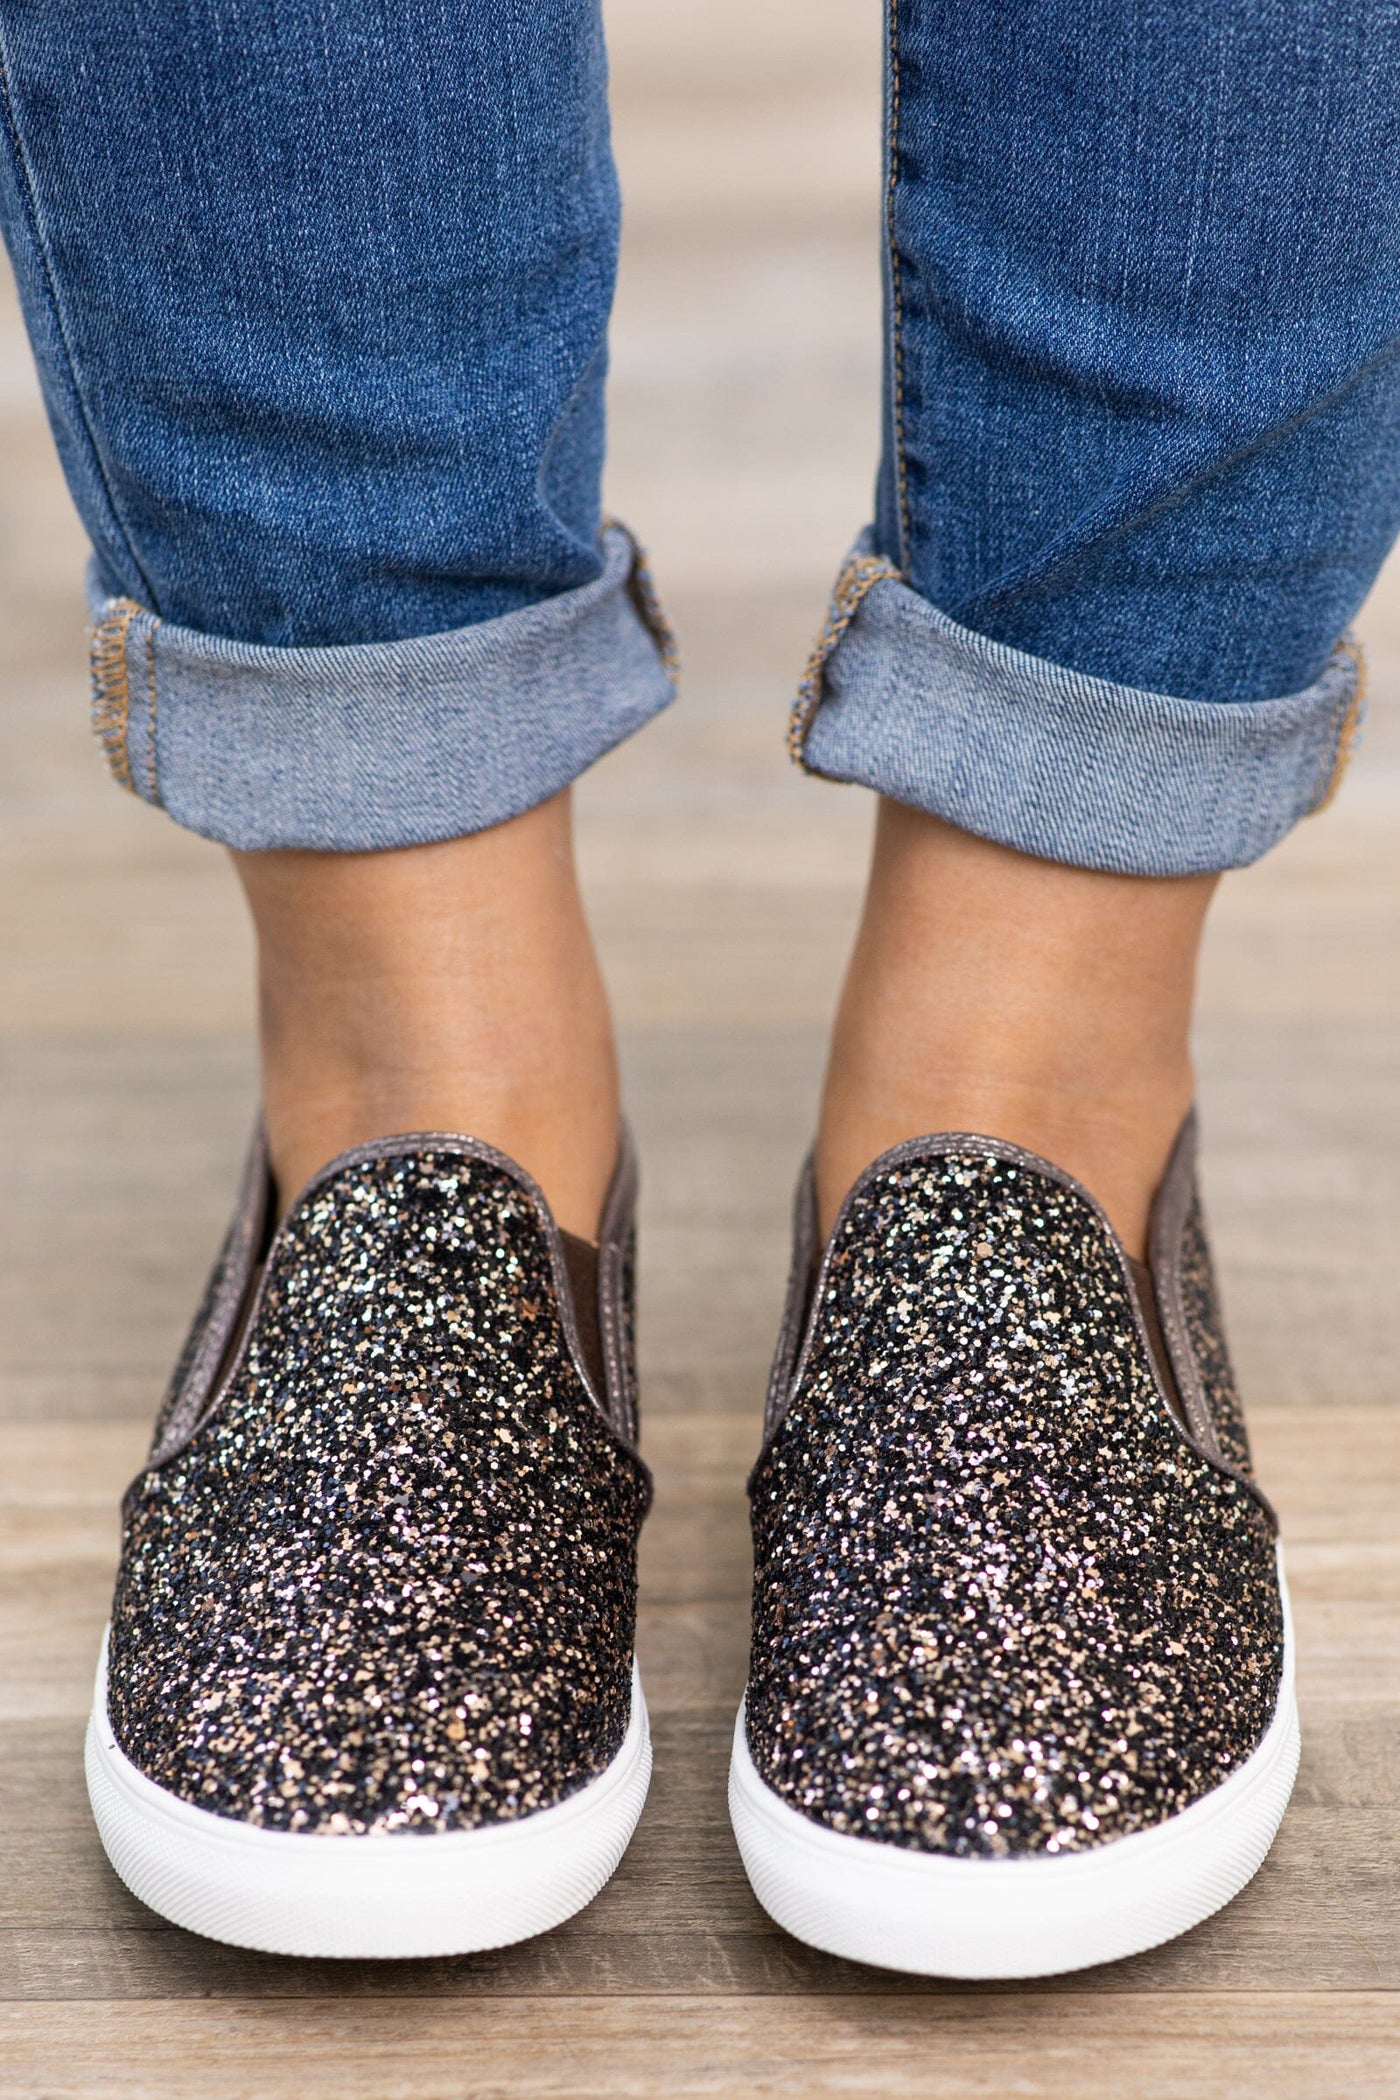 Black and Gold Glitter Slip On Sneakers - Filly Flair